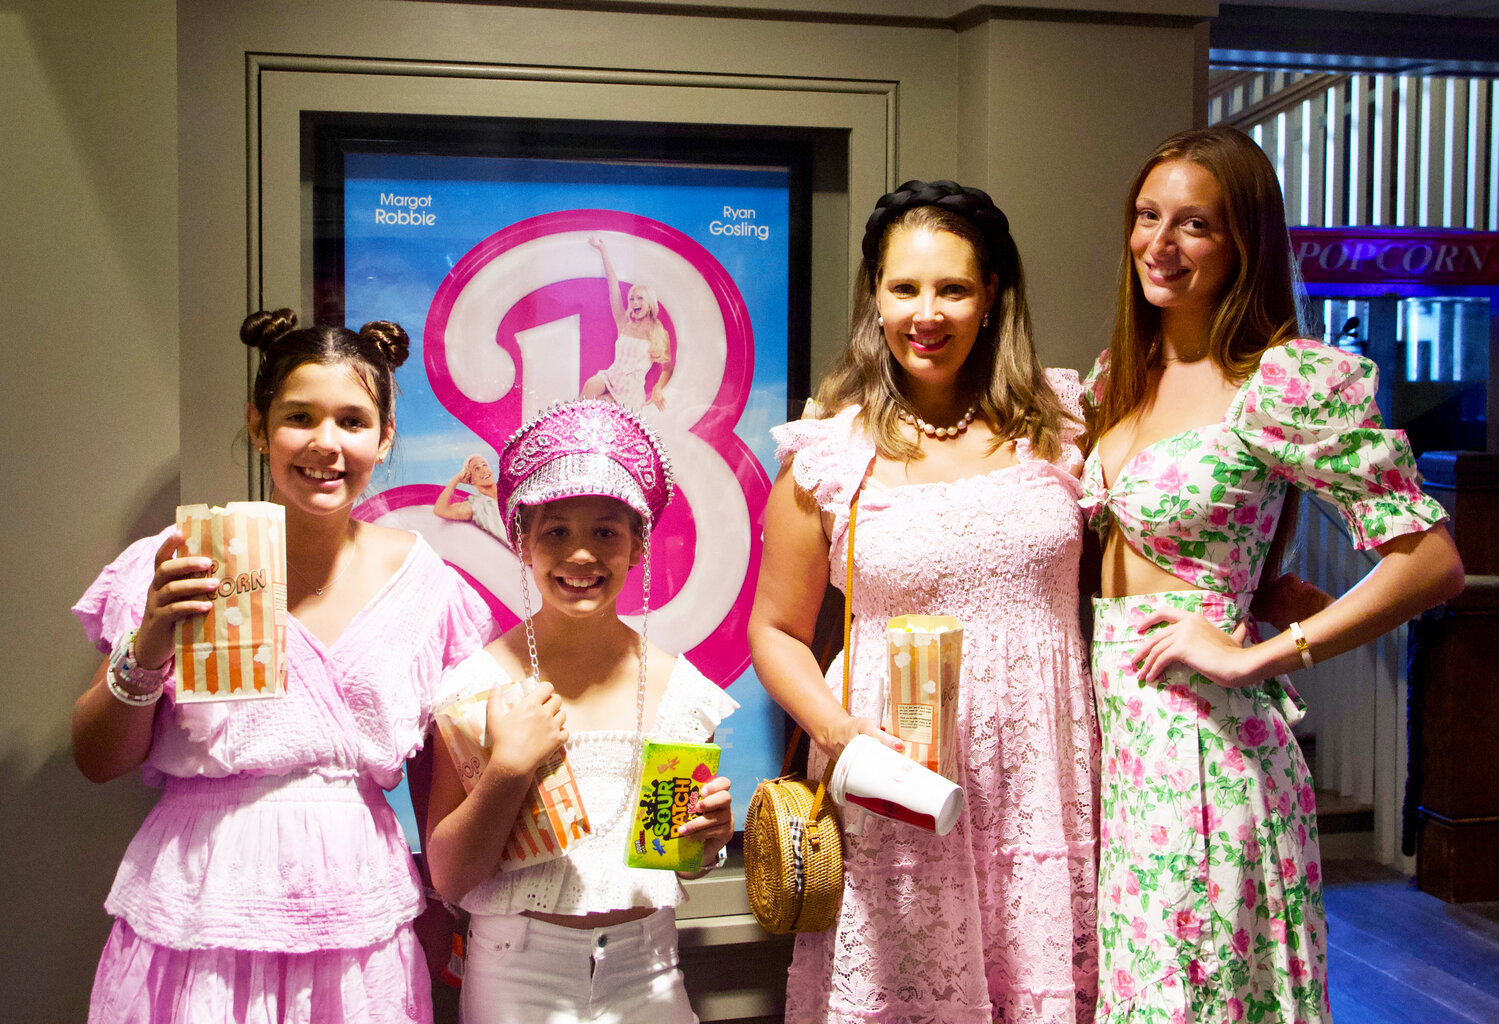 Theater-goers at the Dreamland all dressed up for a screening of “Barbie” last week. After two weeks the film continues to sell out.